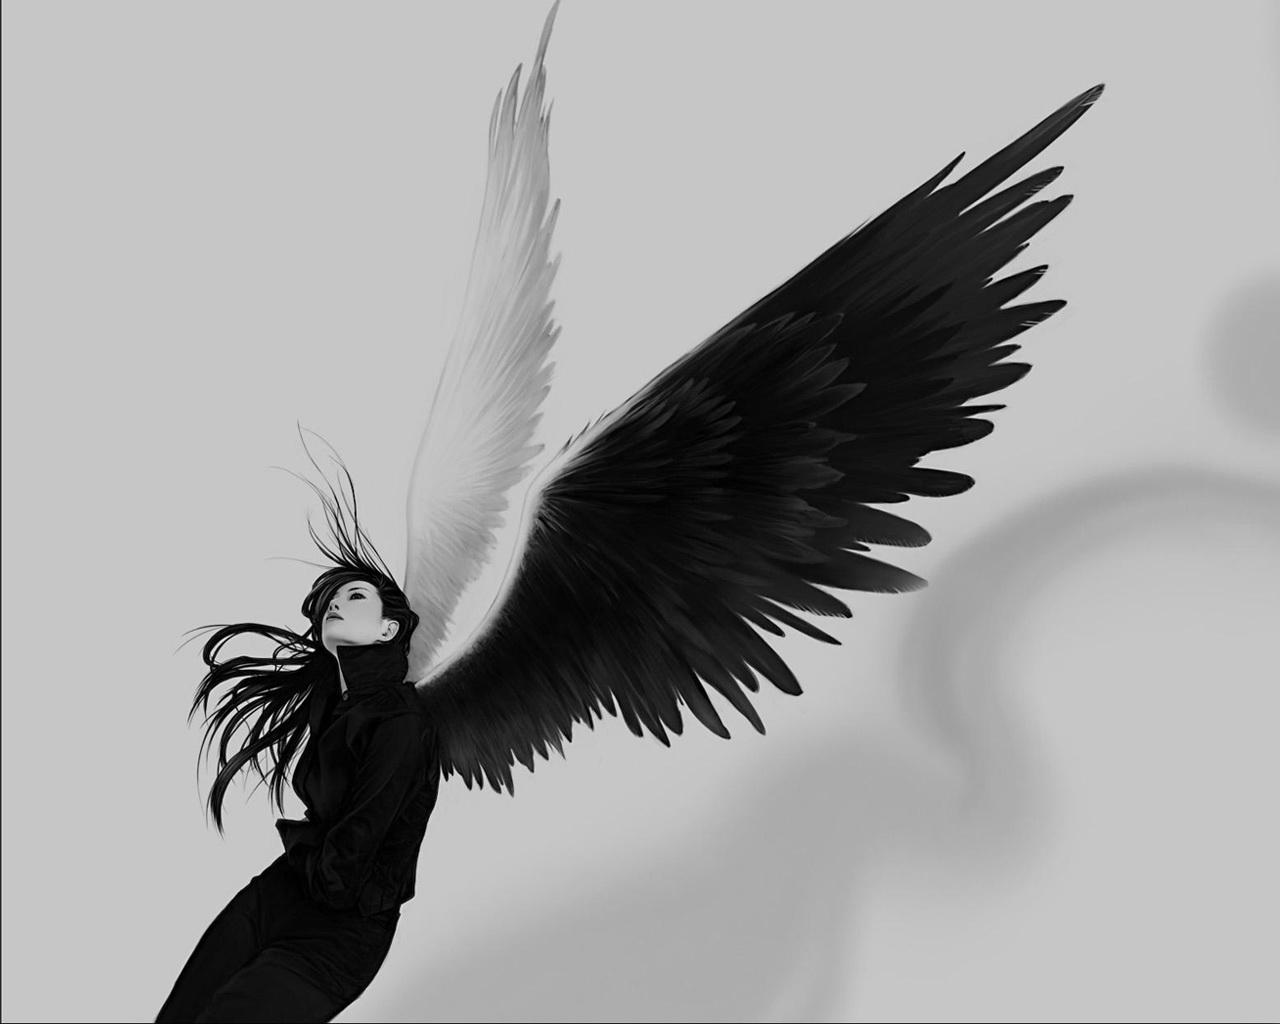 Black and White Angels Logo - Black and White Angel wallpaper from Angels wallpapers